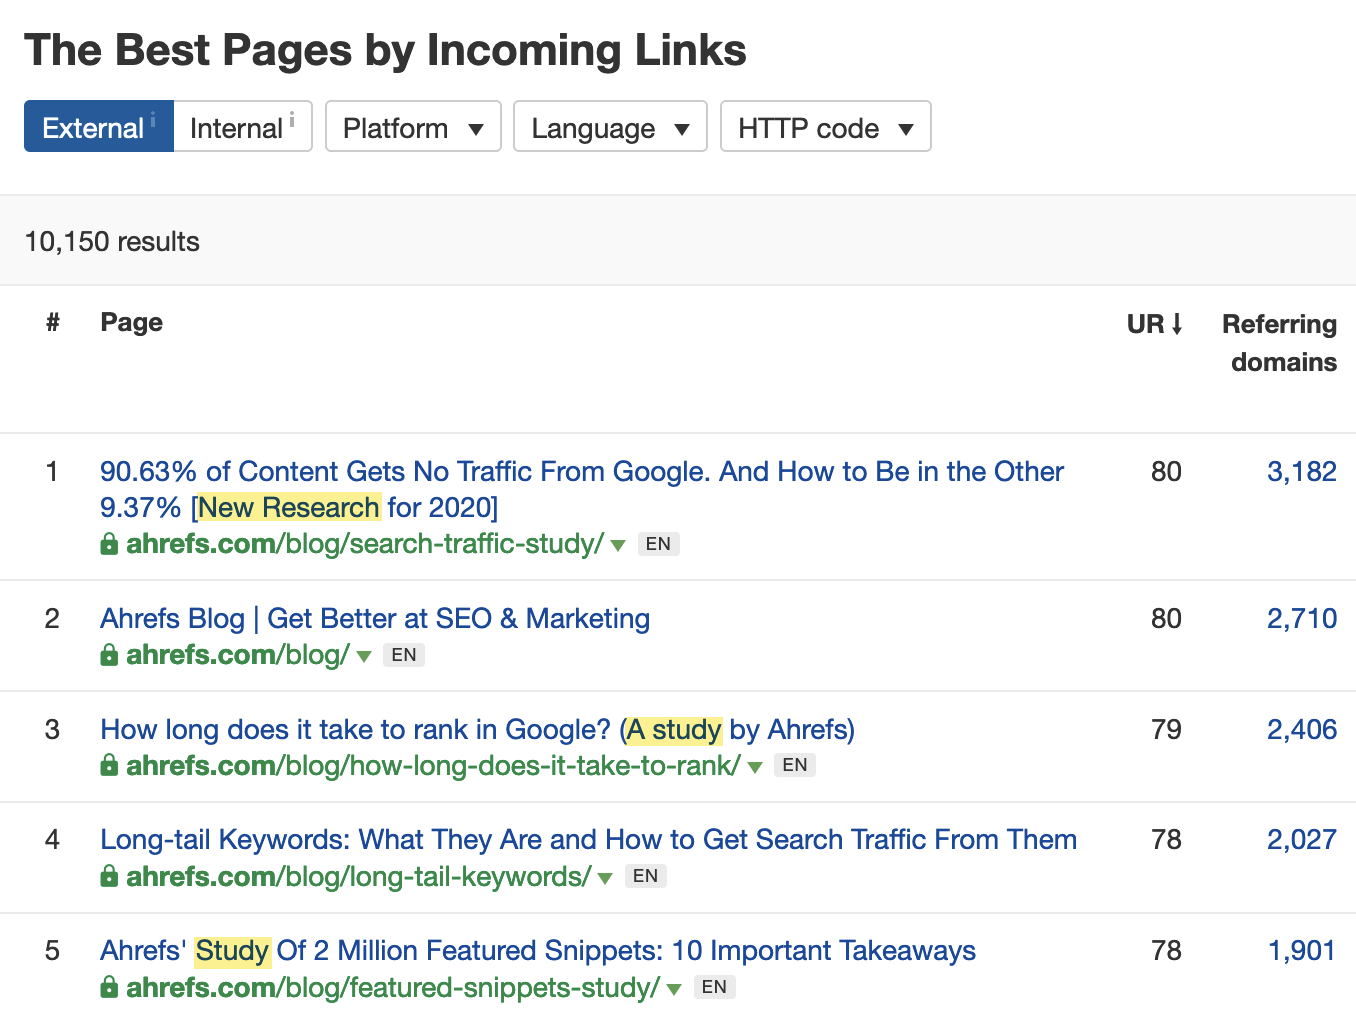 Many of our most linked blog posts are research studies